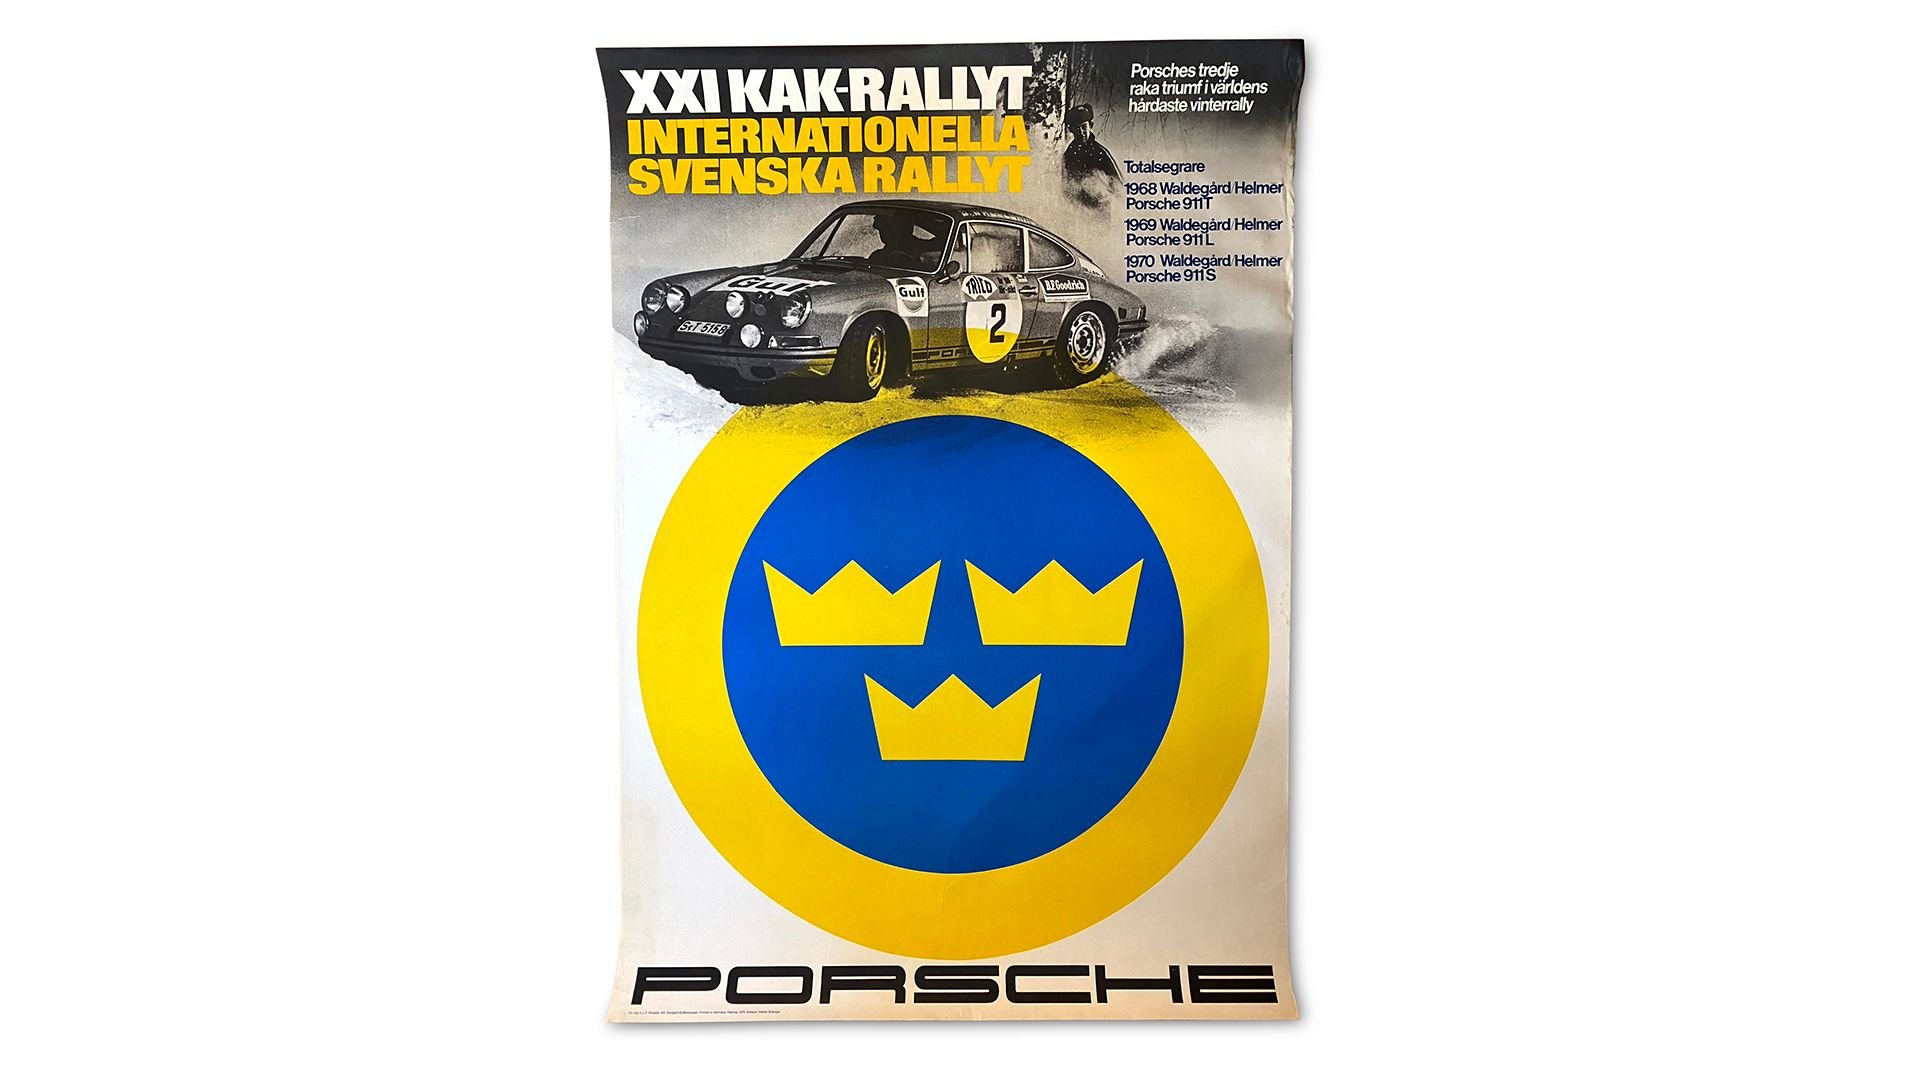 For Sale Group of 11 Porsche 911 (R, ST, RS, RSR) Factory Racing Posters 1968-1973